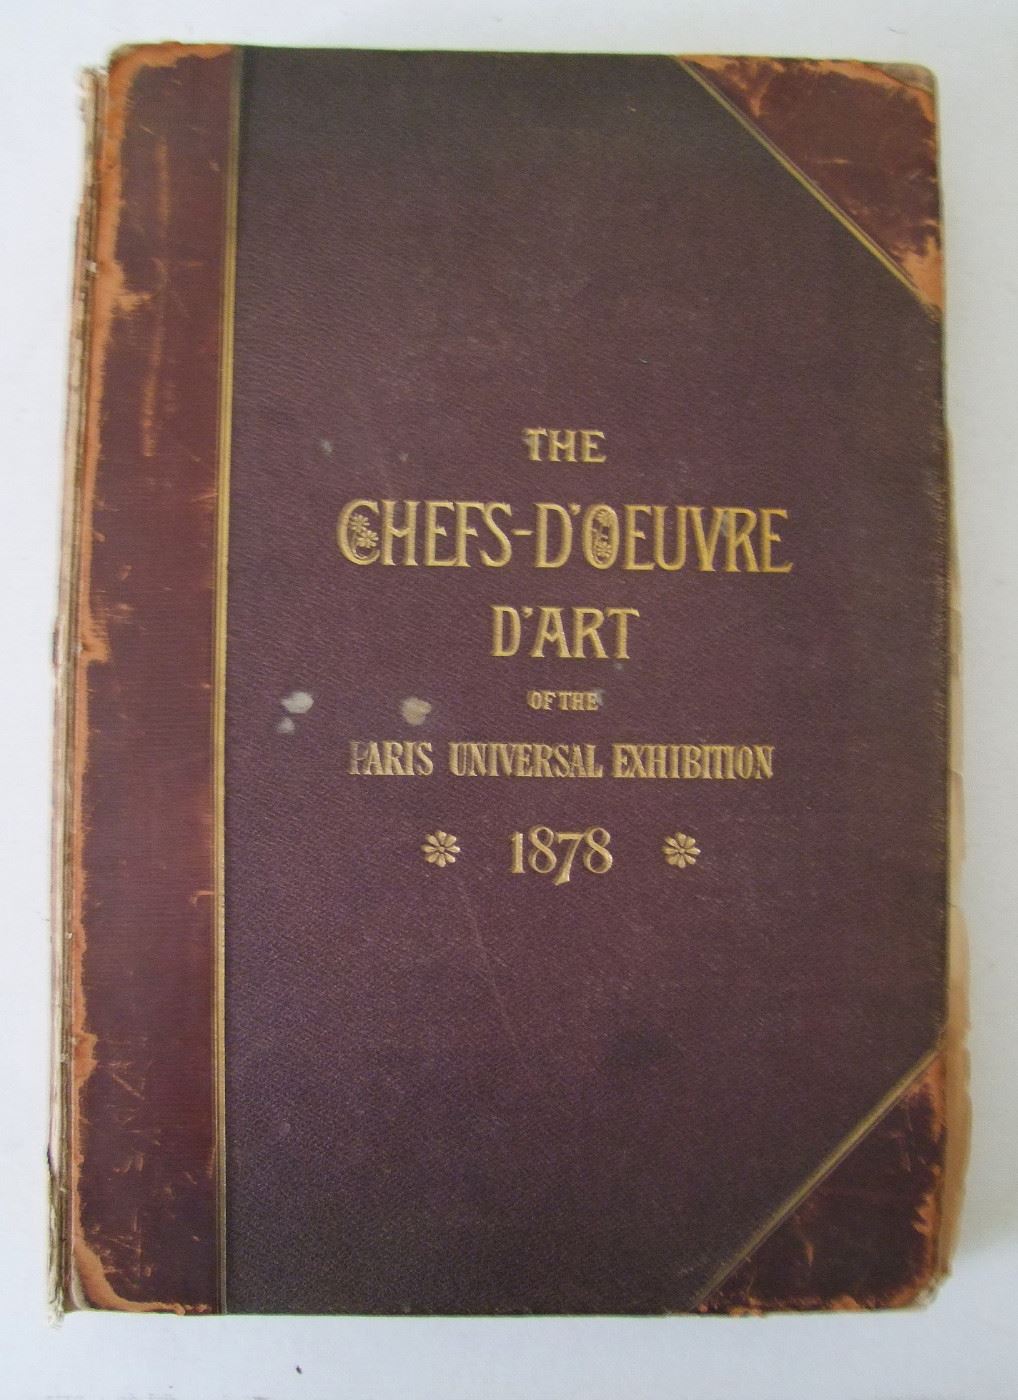 Lot # 001 1878 "Chefs - D'Oeuvre D'Art of the International Exhibition, 1878" in Paris by Edward Strahan, 250+ pages.  Leather bound, (Title translates to "Masterpieces of Art", only the title is in French). Loaded with engravings on fine heavy cotton paper throughout, 48 full page copper plate engravings, 28 full page wood engravings and 80 smaller wood engravings. There are also large images of the Paris Exhibition Buildings, 12" x 17".    Cond:  Moderate wear overall with a loose cover.  Est. $150-250